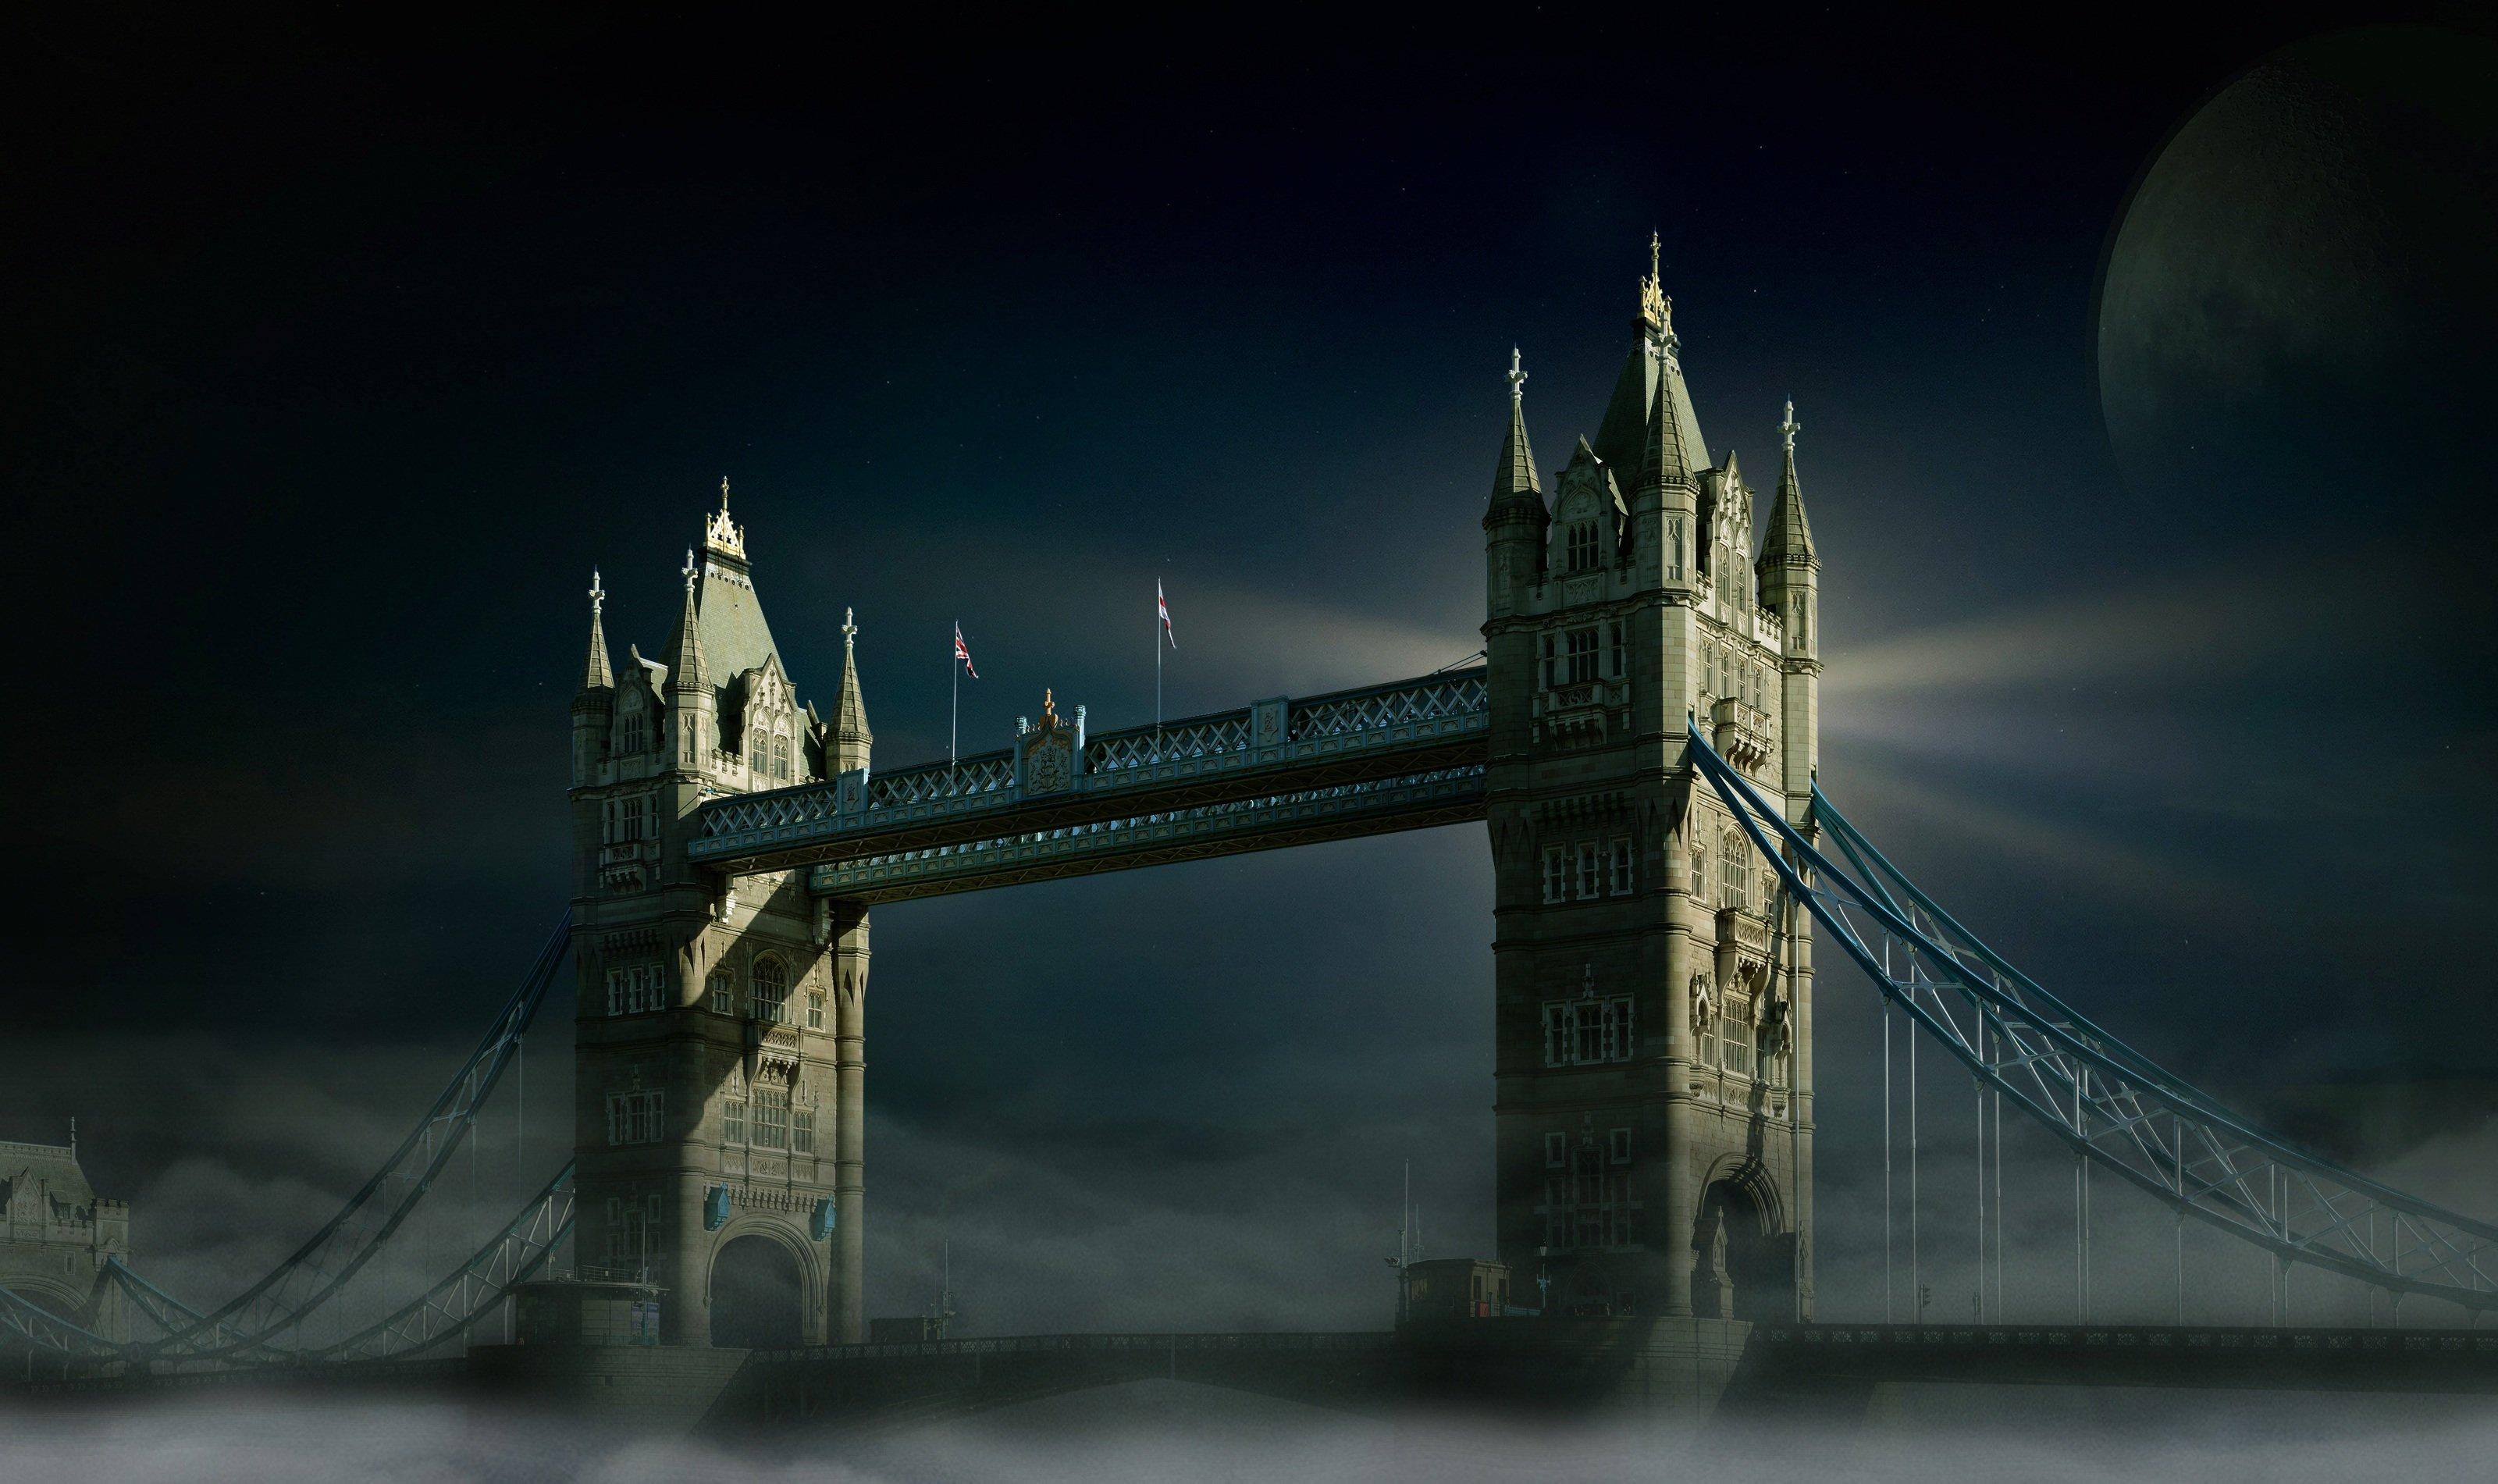 london 4K wallpaper for your desktop or mobile screen free and easy